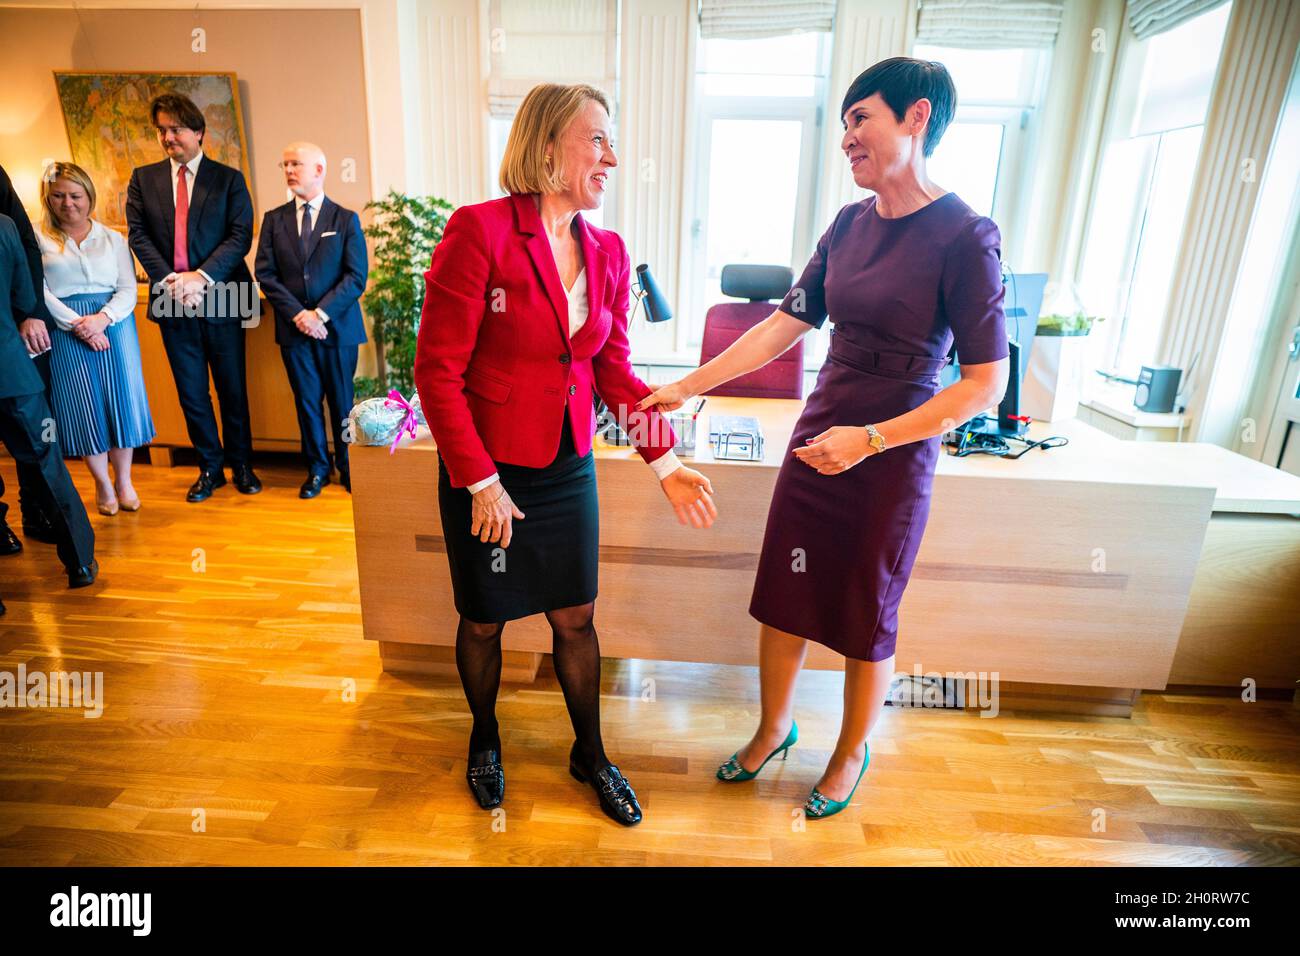 Oslo, Norway, 14/10/2021, Oslo 20211014.Upcoming Foreign Minister Anniken Huitfeldt (Labor Party) and outgoing Foreign Minister Ine Marie Eriksen Soreide (H) during the key handover at the Ministry of Foreign Affairs in Oslo on Thursday. Photo: Håkon Mosvold Larsen / NTB Stock Photo